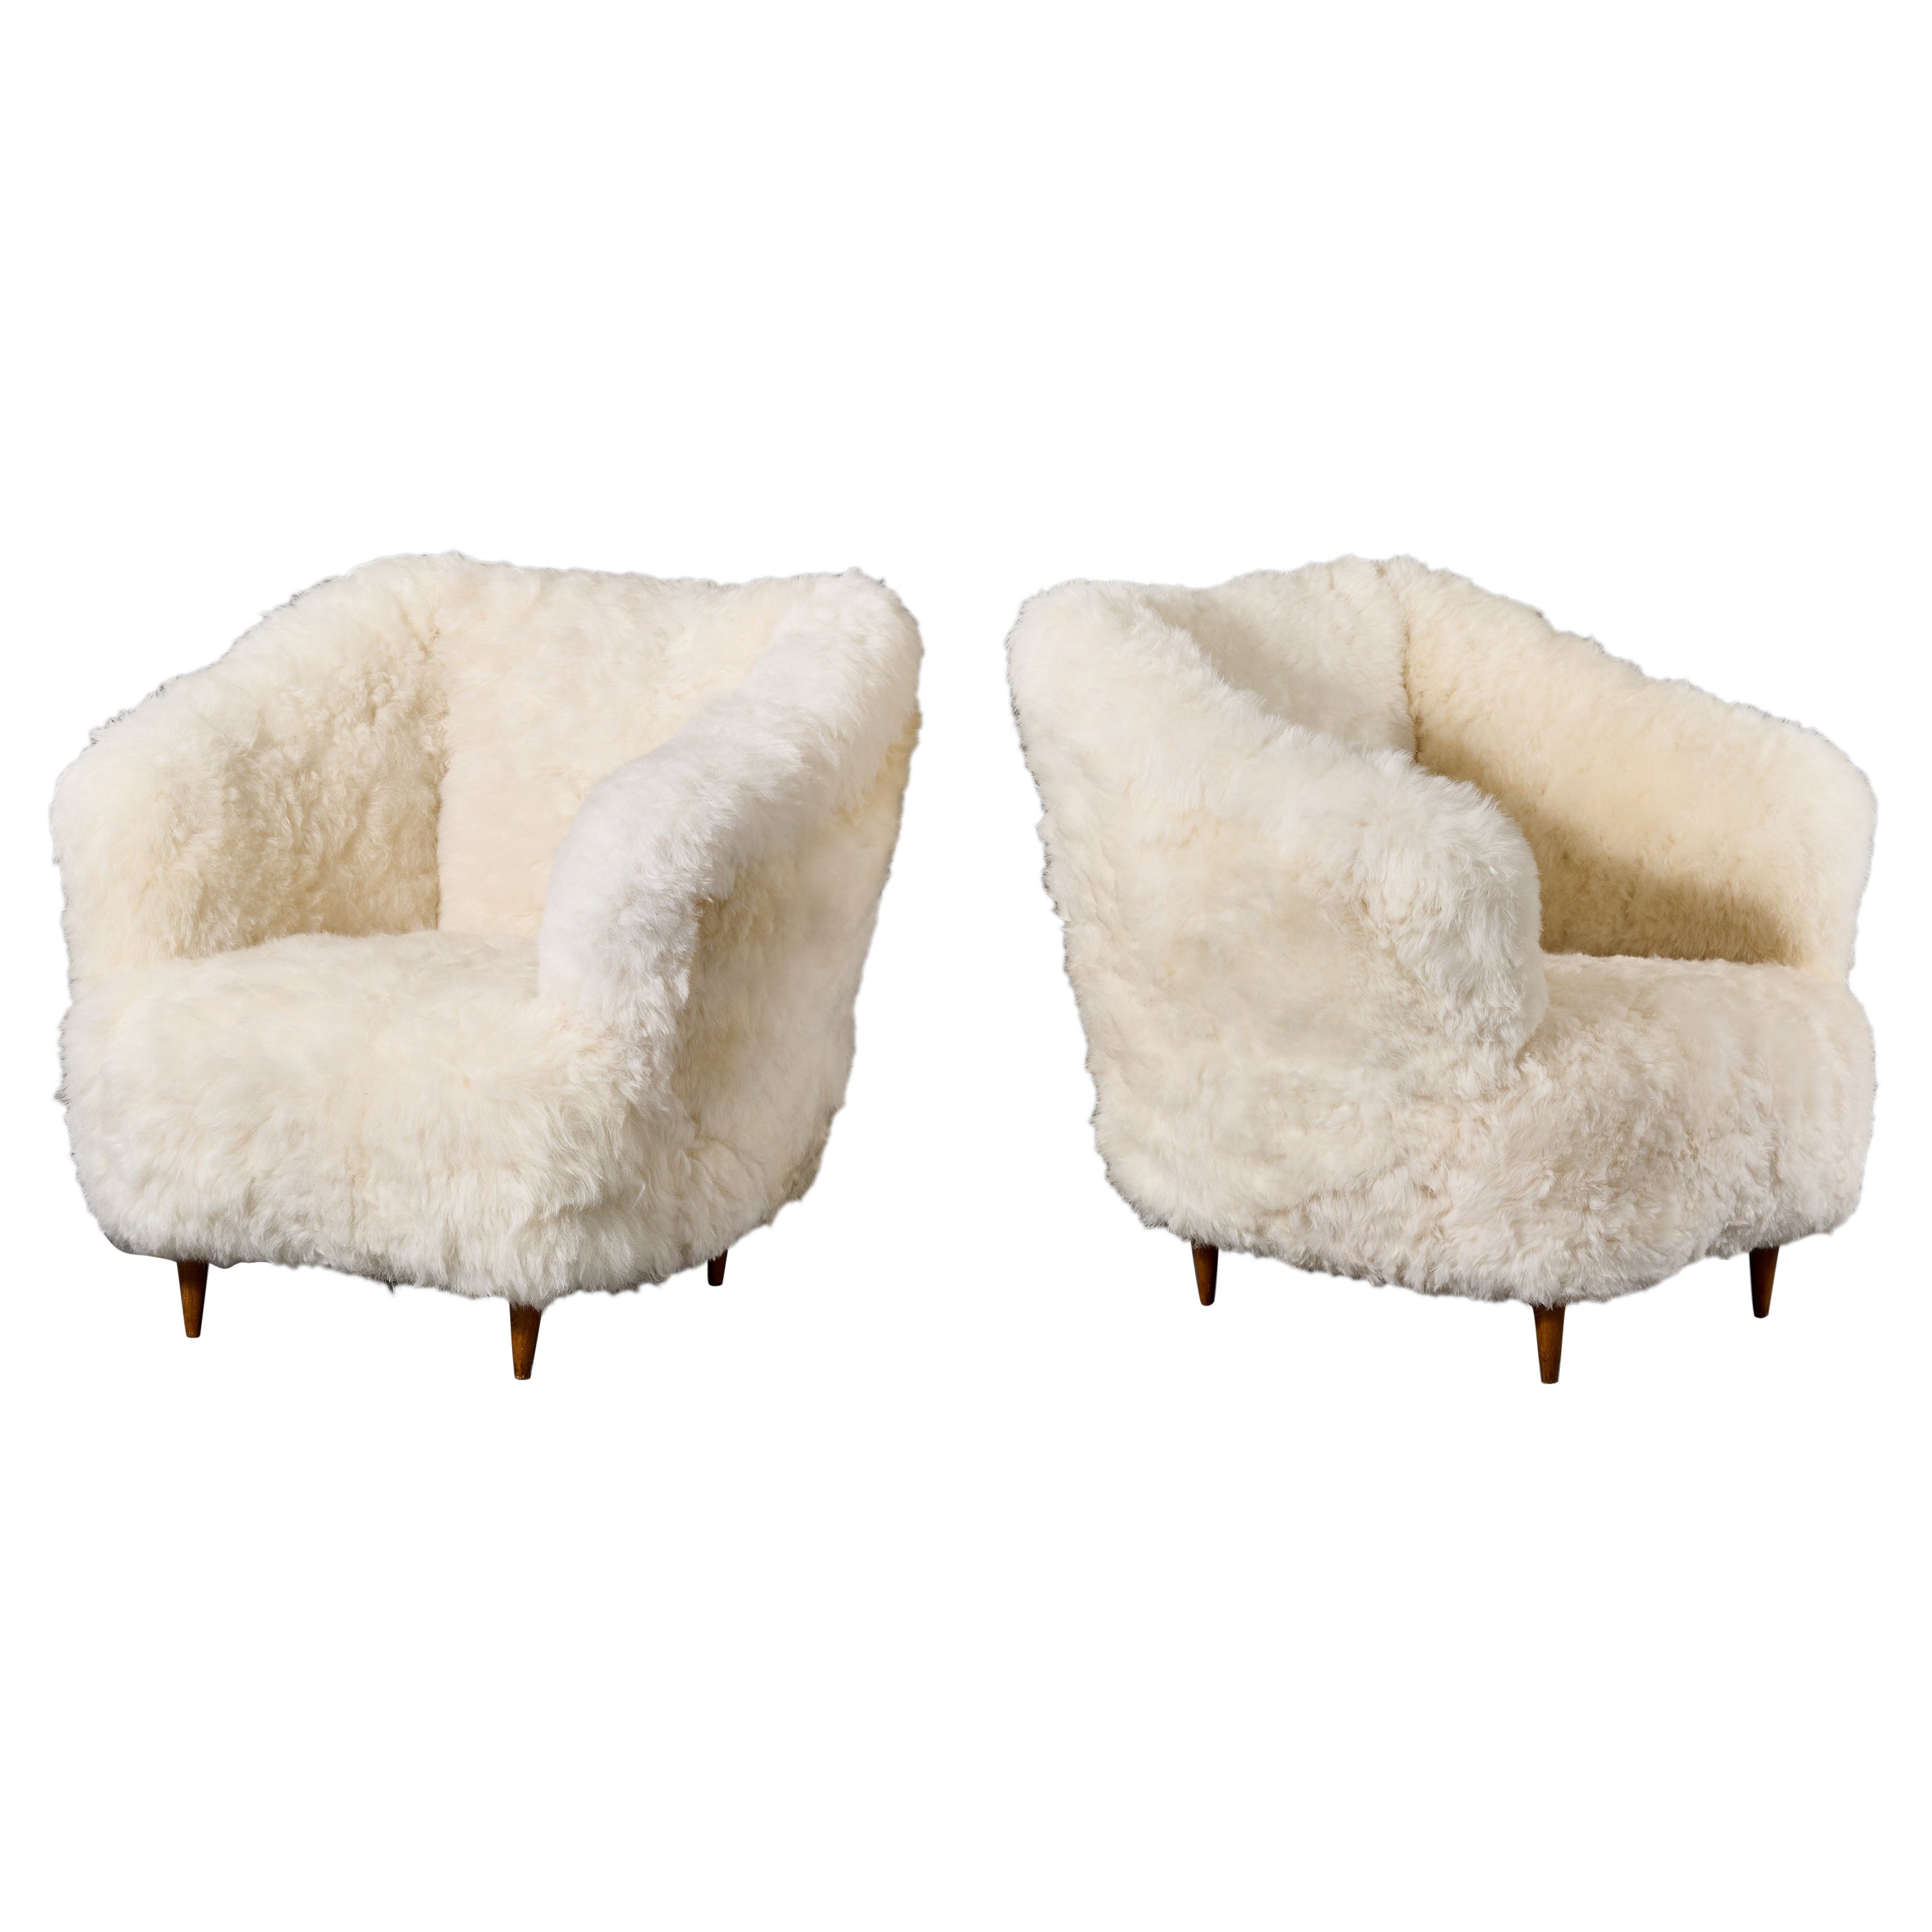 Gio Ponti: Armchairs in White Sheepskin, Italy 1950s For Sale